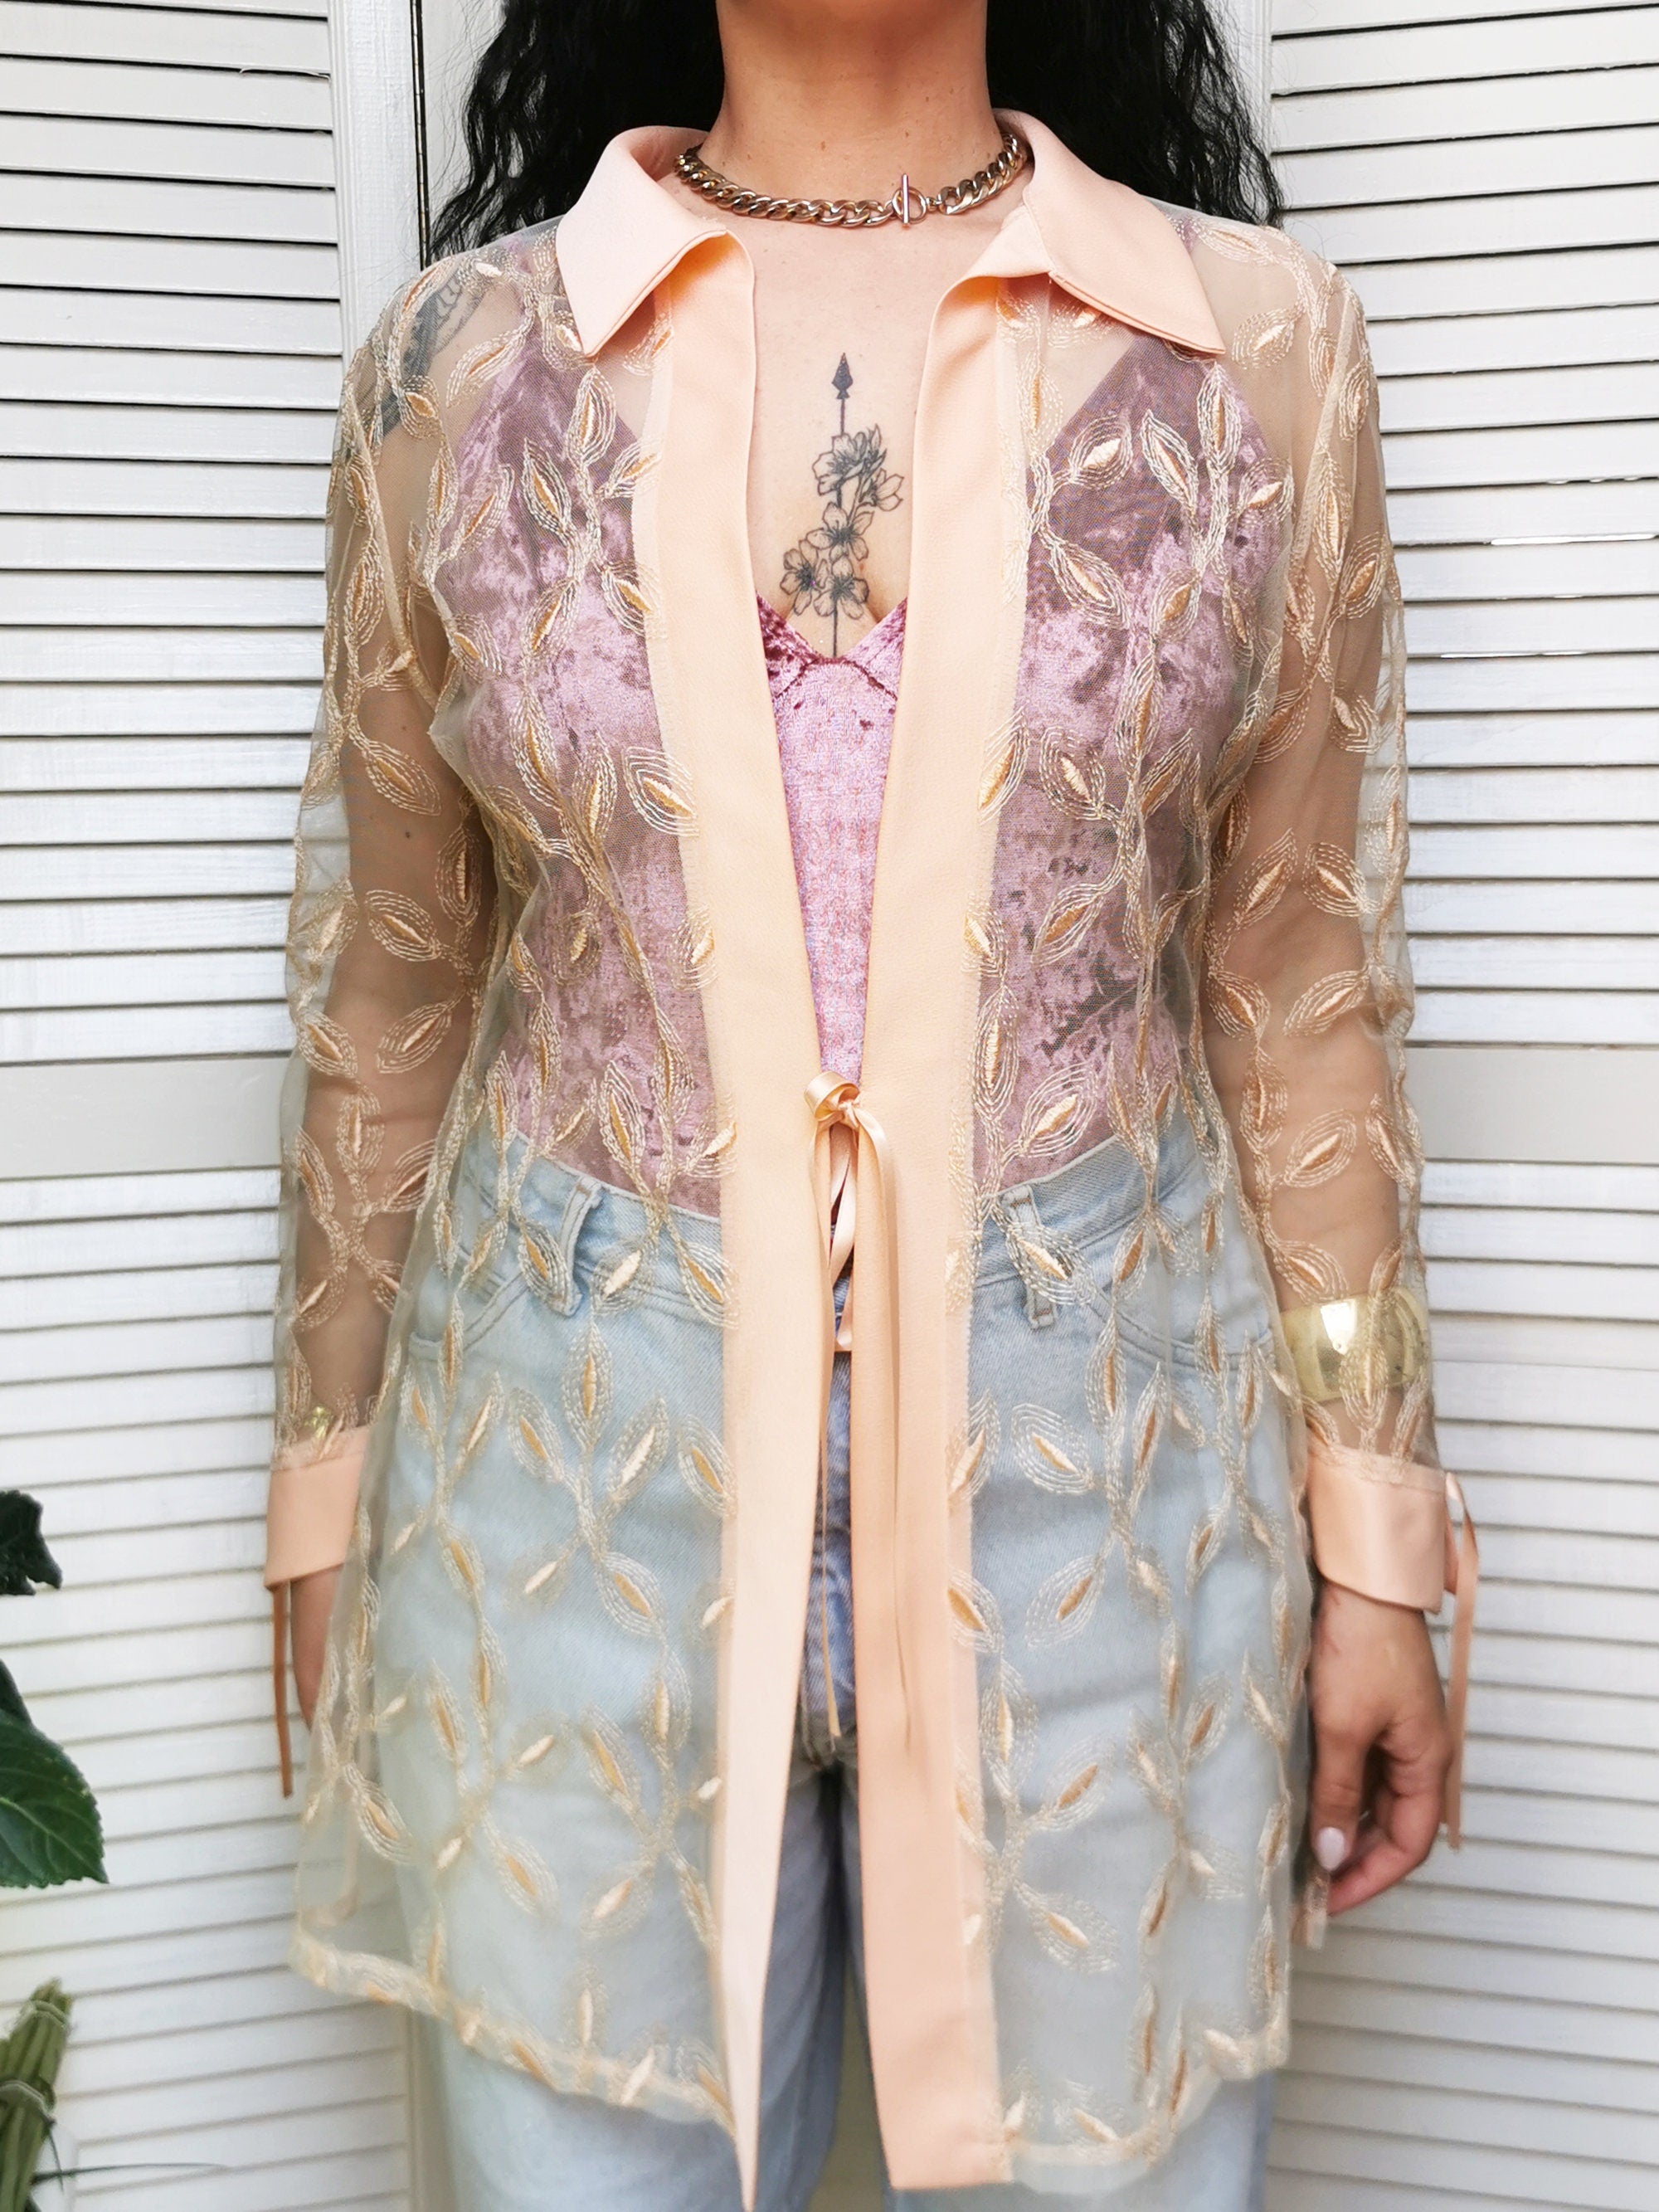 Vintage blouse, Vintage 80s embroidery long sheer tie front jacket top